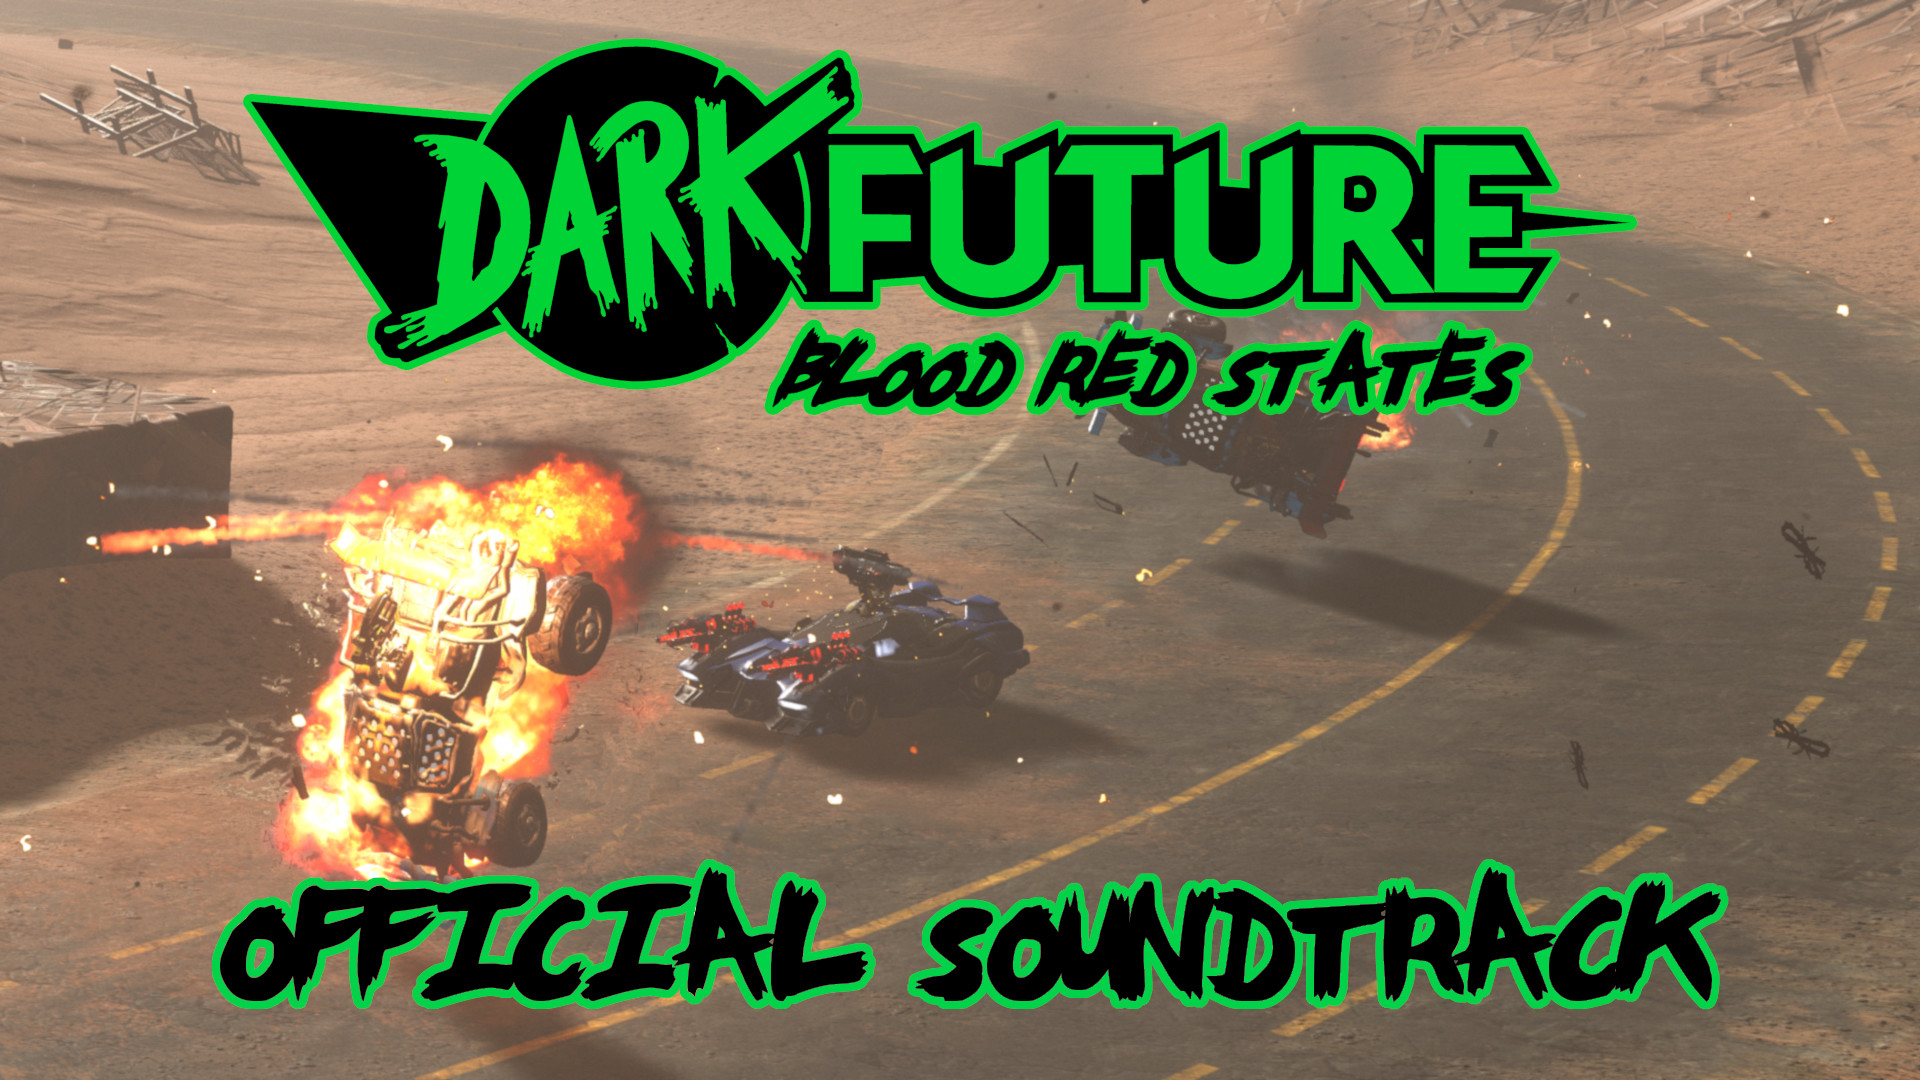 Dark Future: Blood Red States, Official Soundtrack Featured Screenshot #1